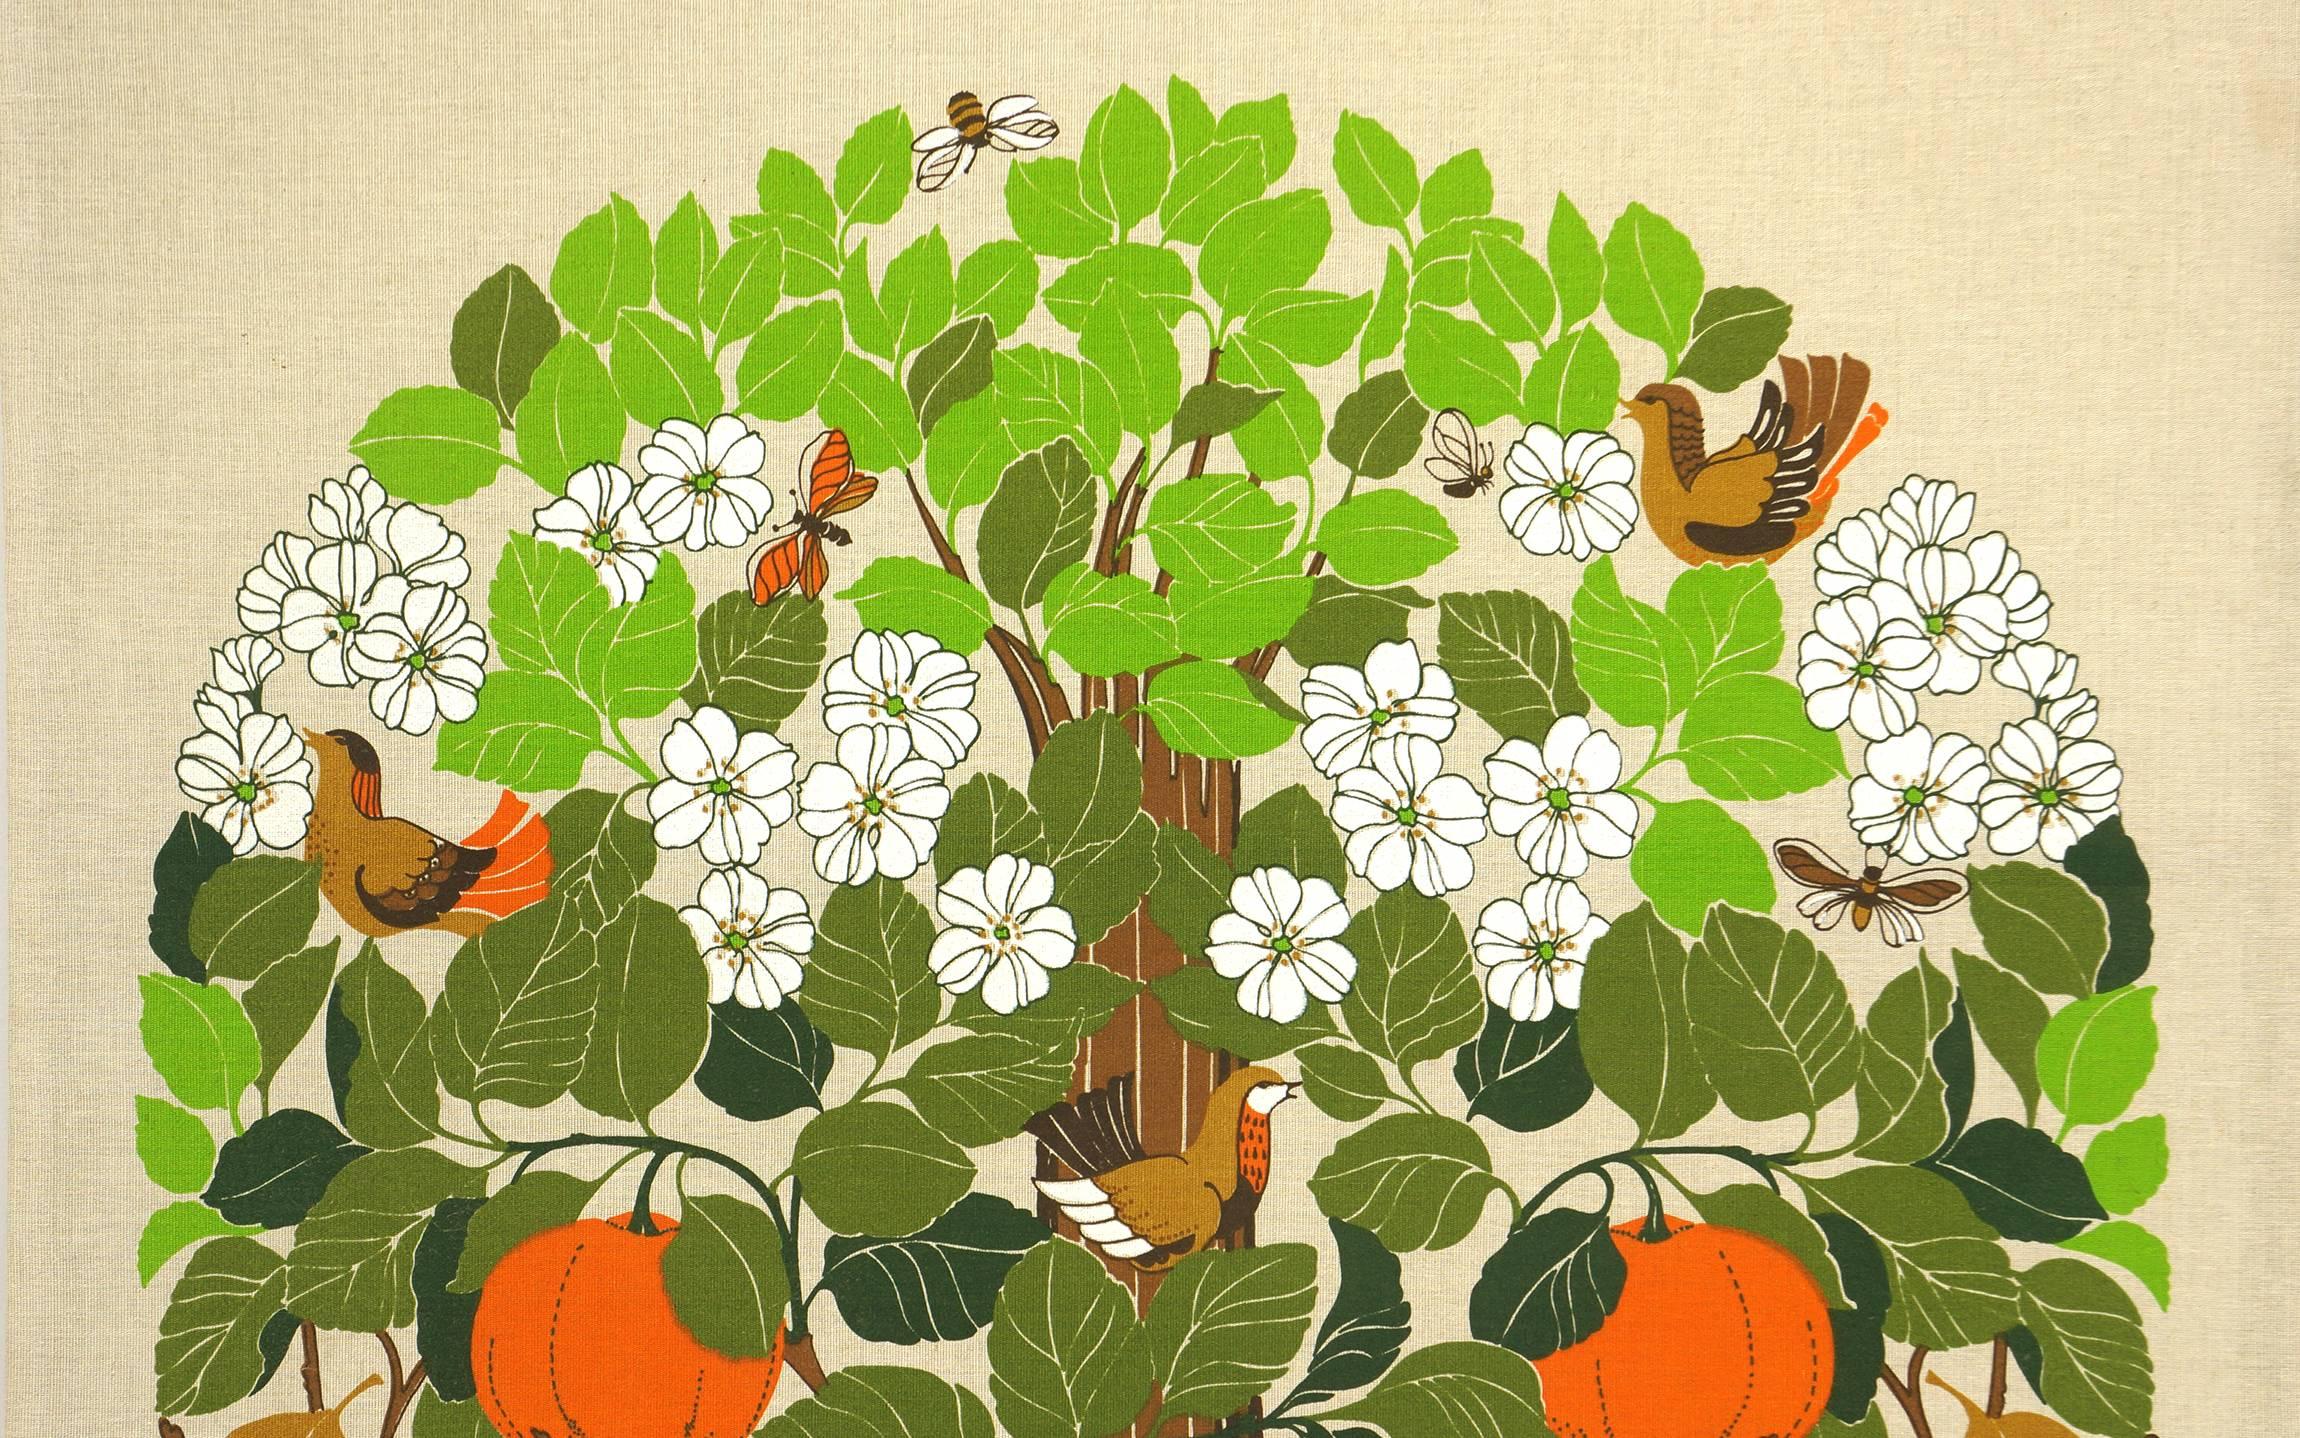 Almedahls wall hanging design Toni Hermansson hand printed on linen from Sweden 1970s.